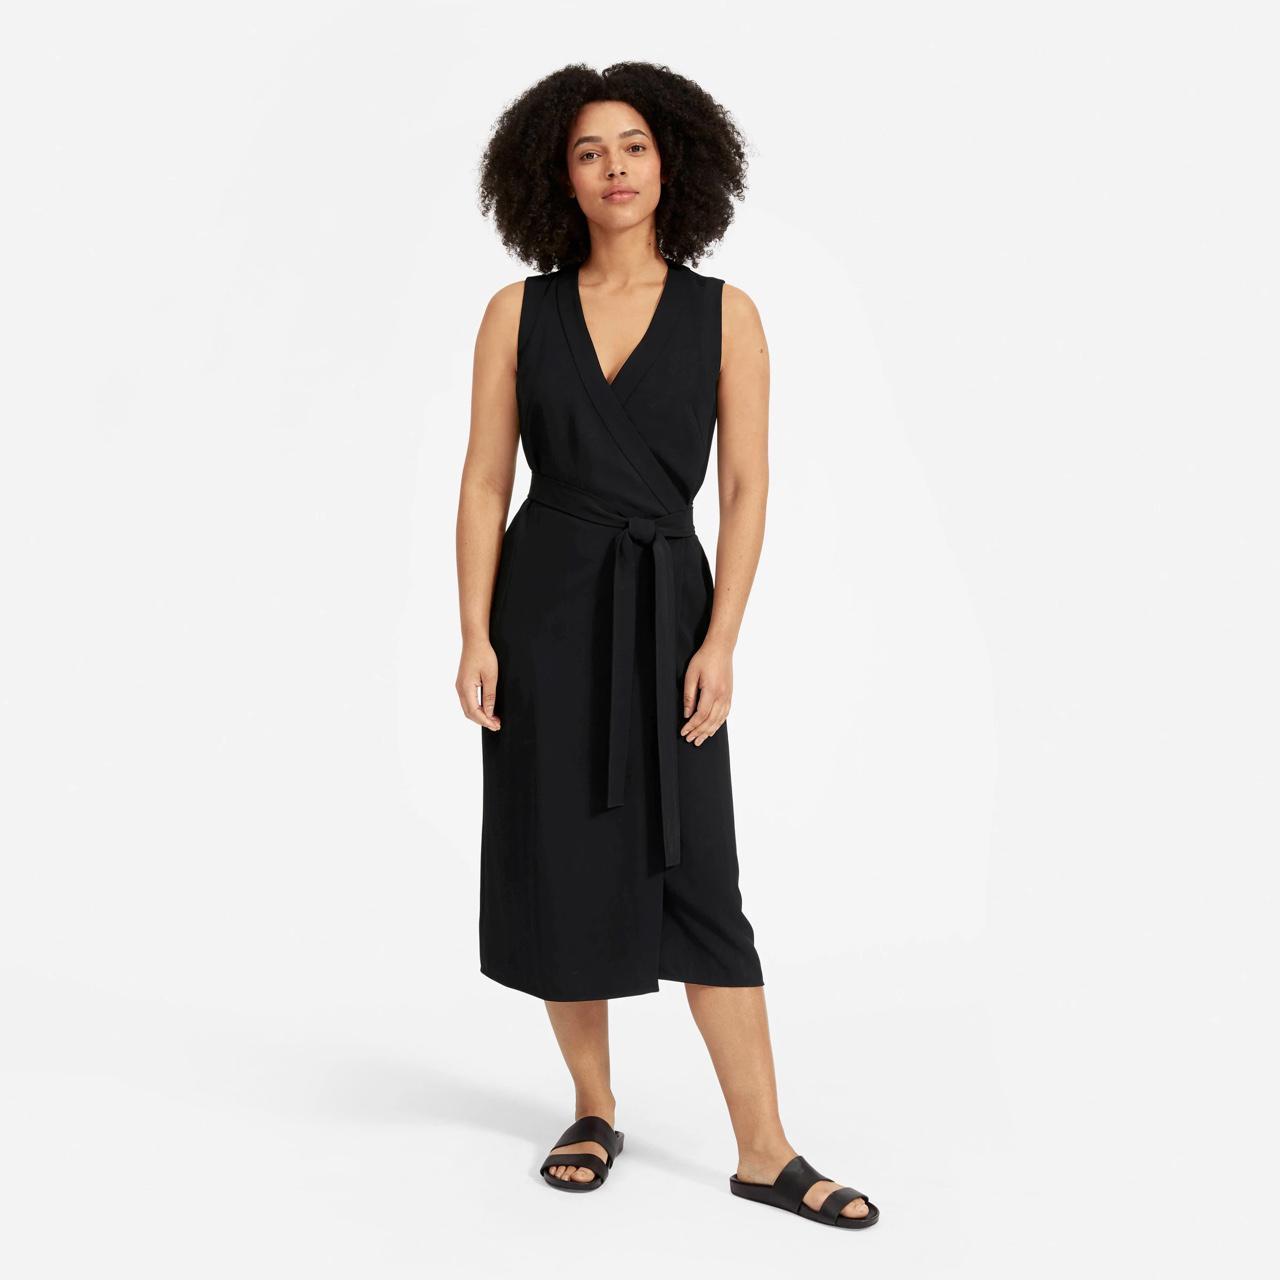 EVERLANE WRAP DRESS NWT, bought and couldn't be... - Depop